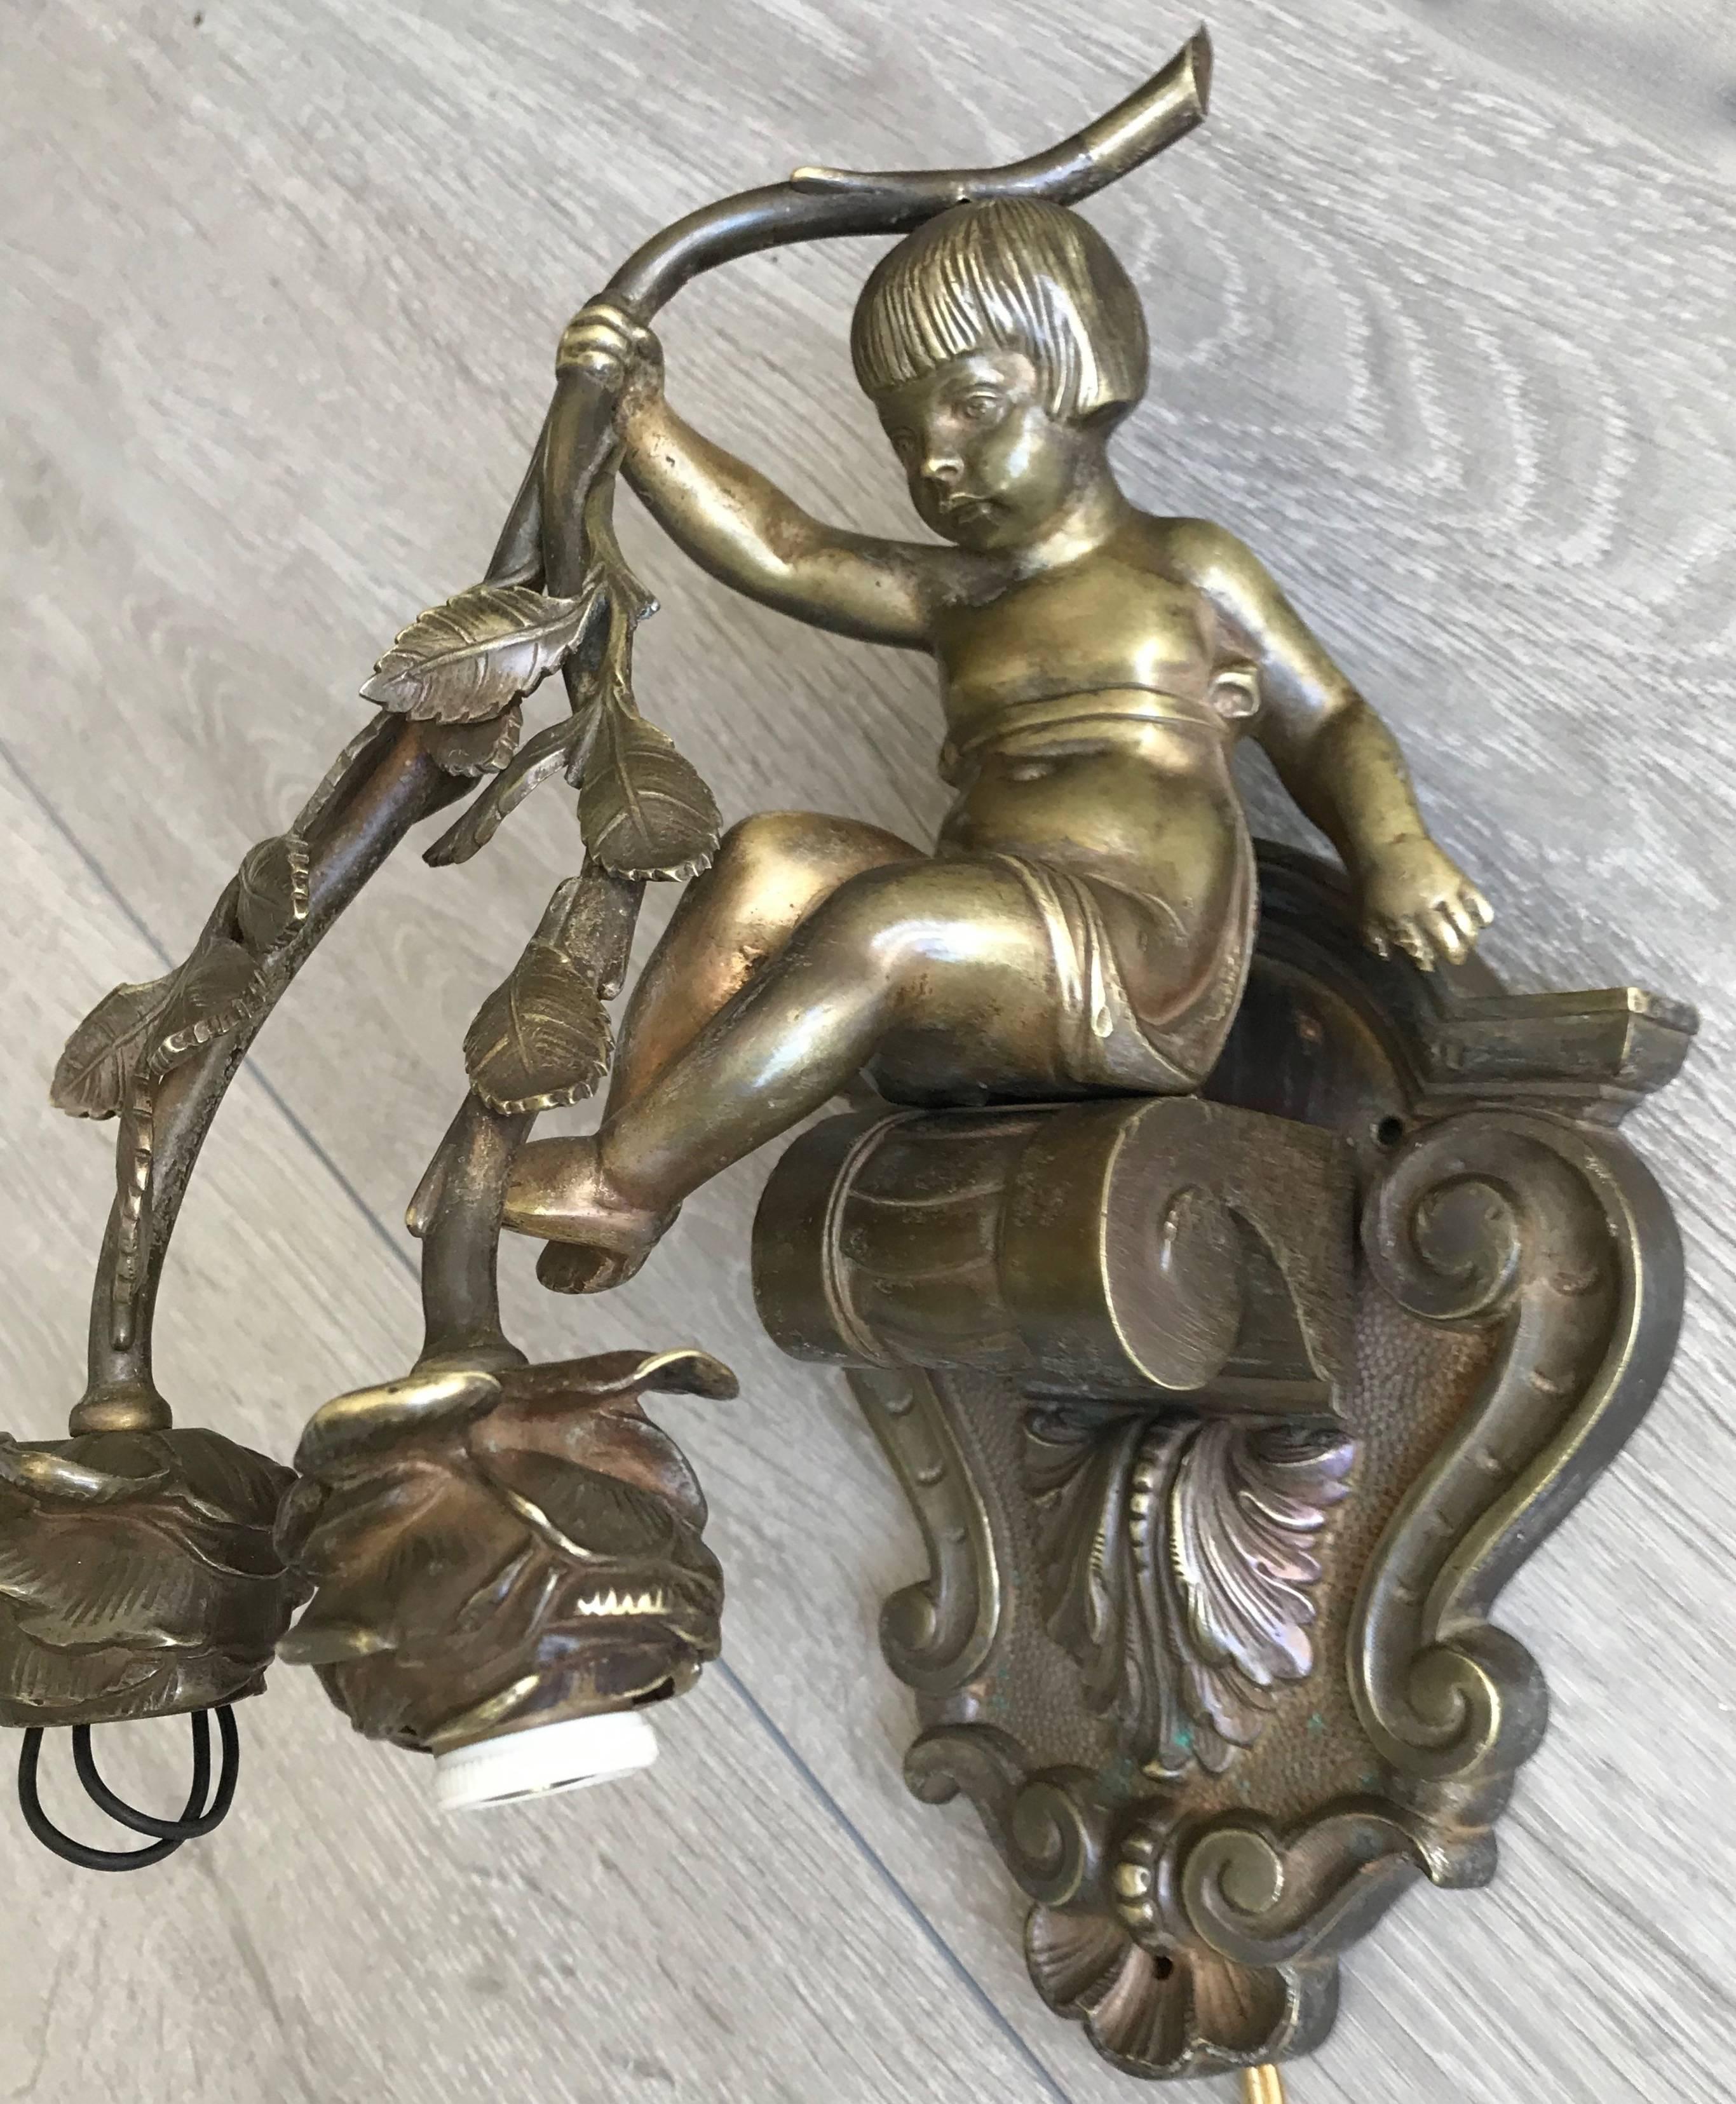 Rare and original bronze wall bracket sconce.

If children and flowers bring joy to your life then this antique wall sconce could be perfect for you. This sculptural bronze wall light depicts a boy sitting on a neoclassical bracket whilst holding up